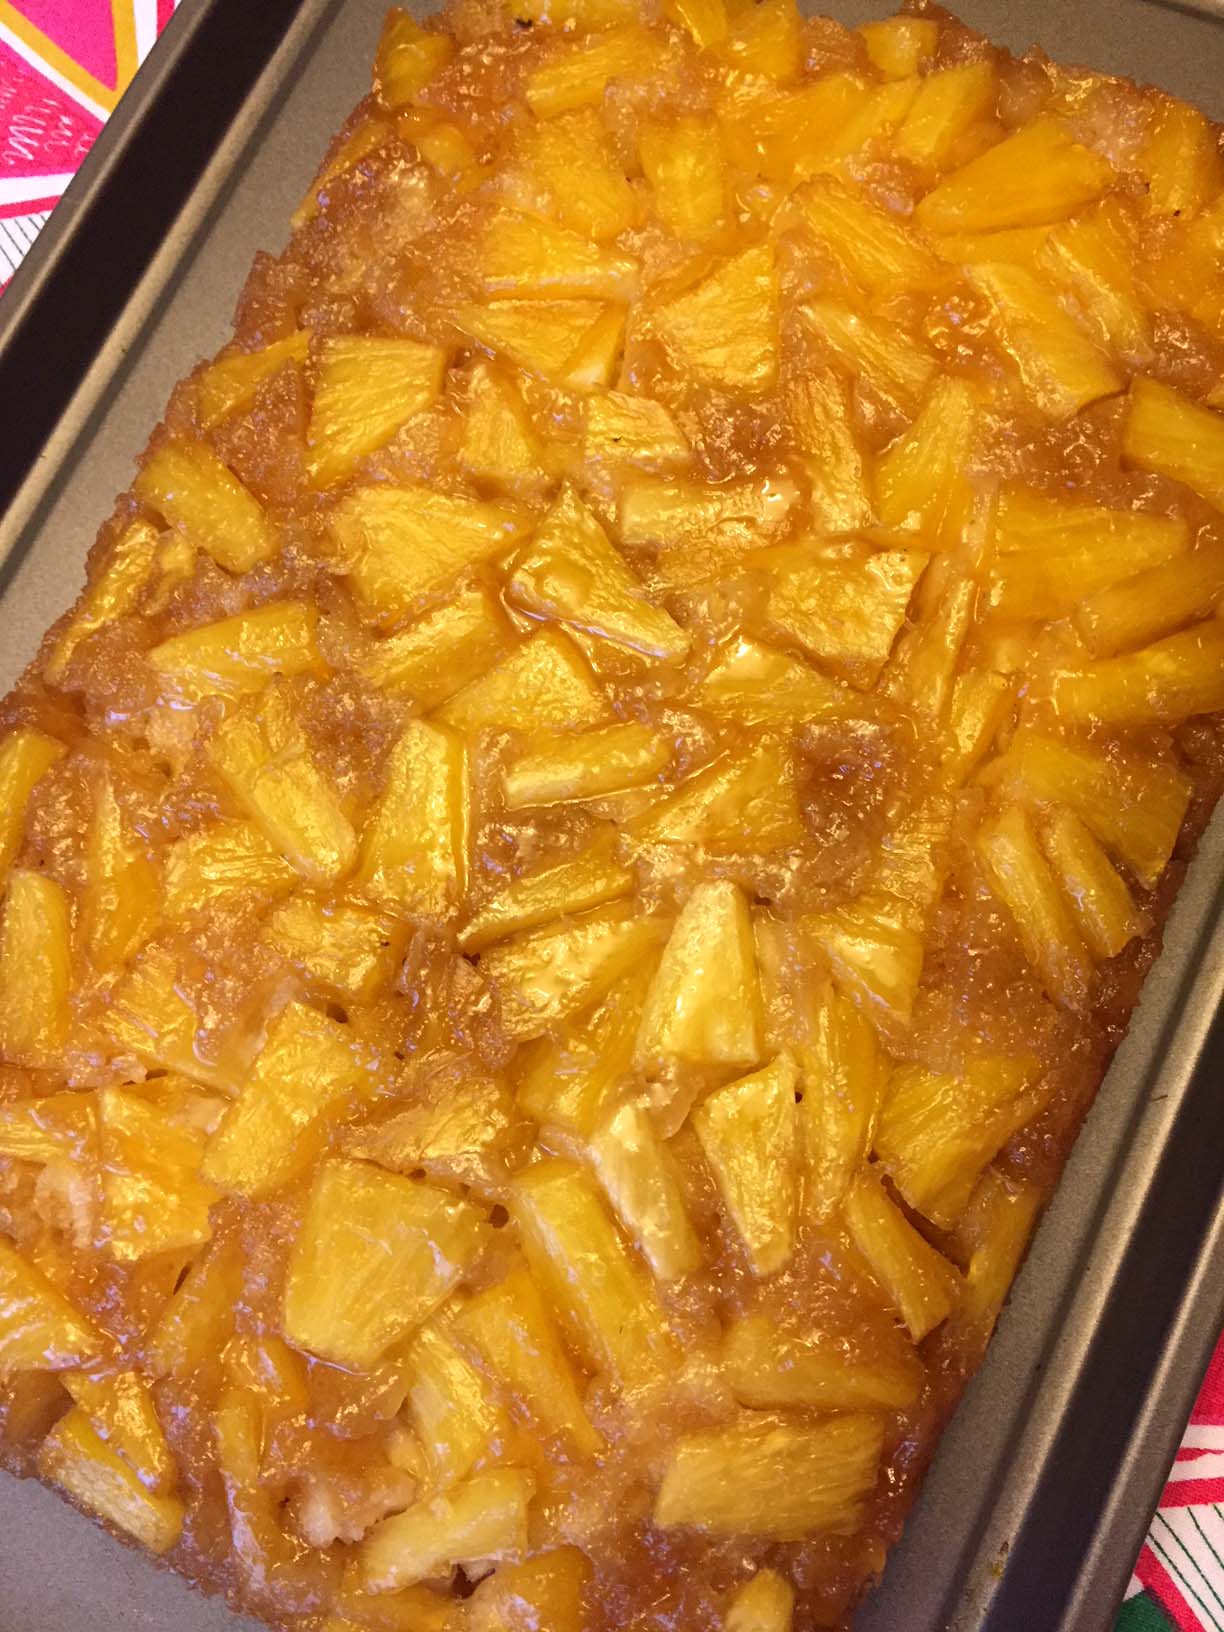 Pineapple Upside Down Cake Recipe Using Cake Mix - Back To My Southern Roots